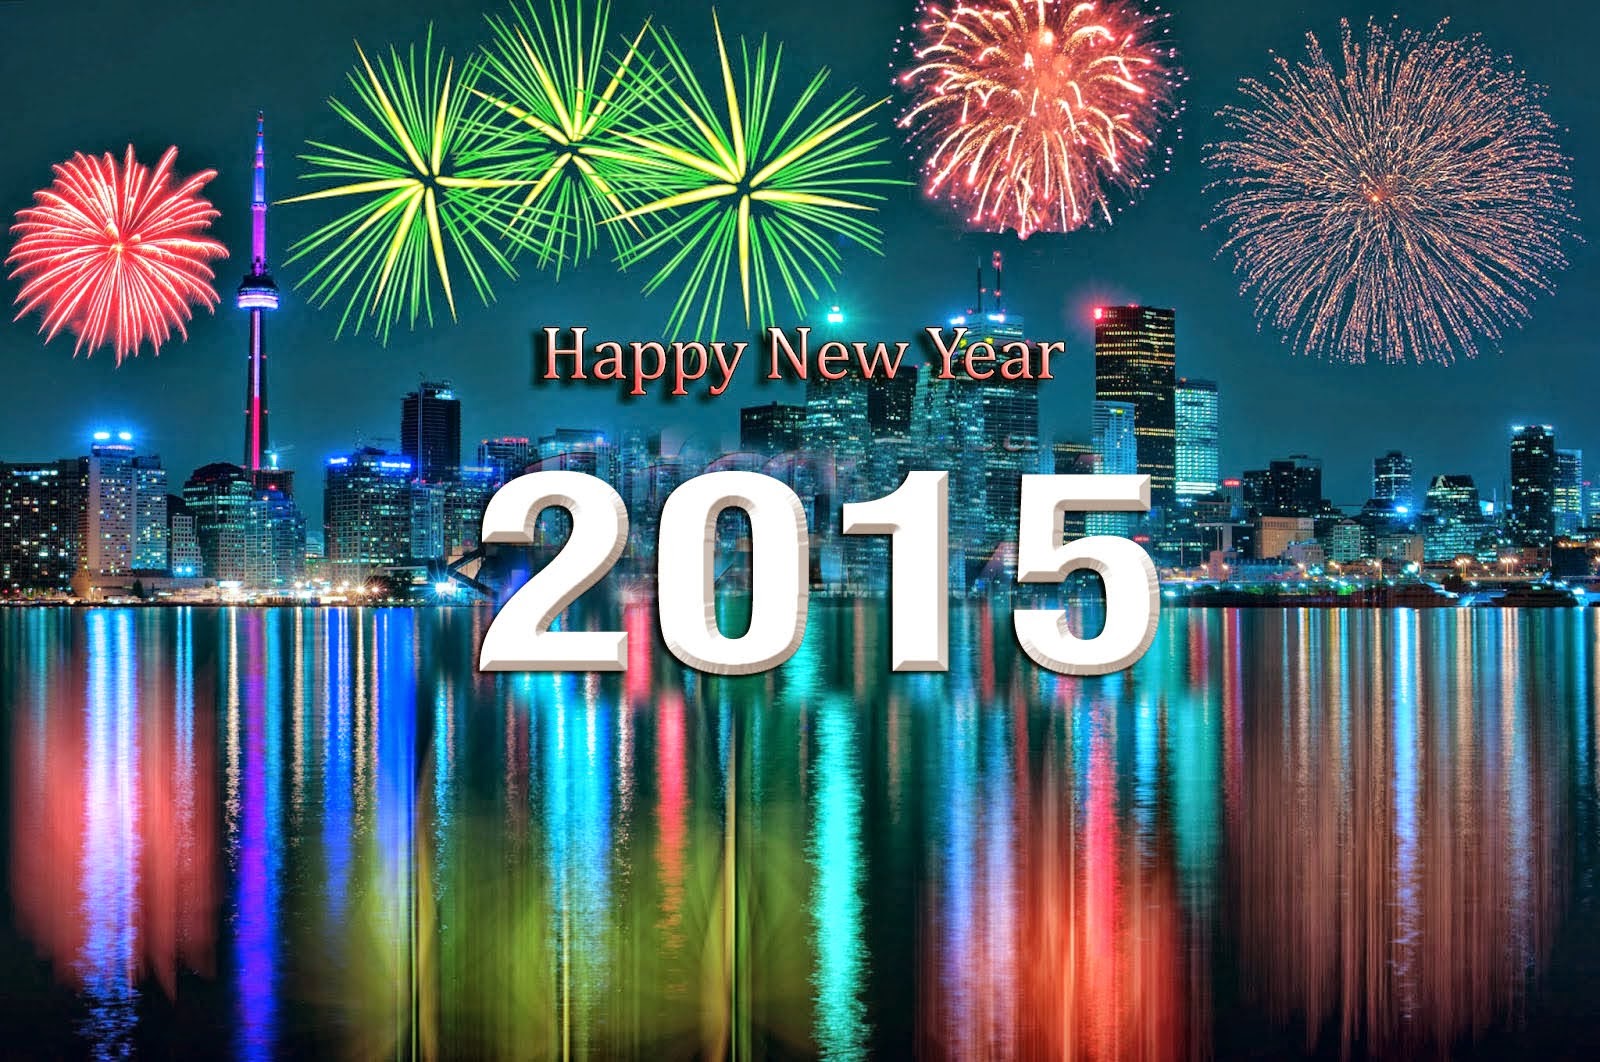 Amdi Happy New Year Wallpaper Collections